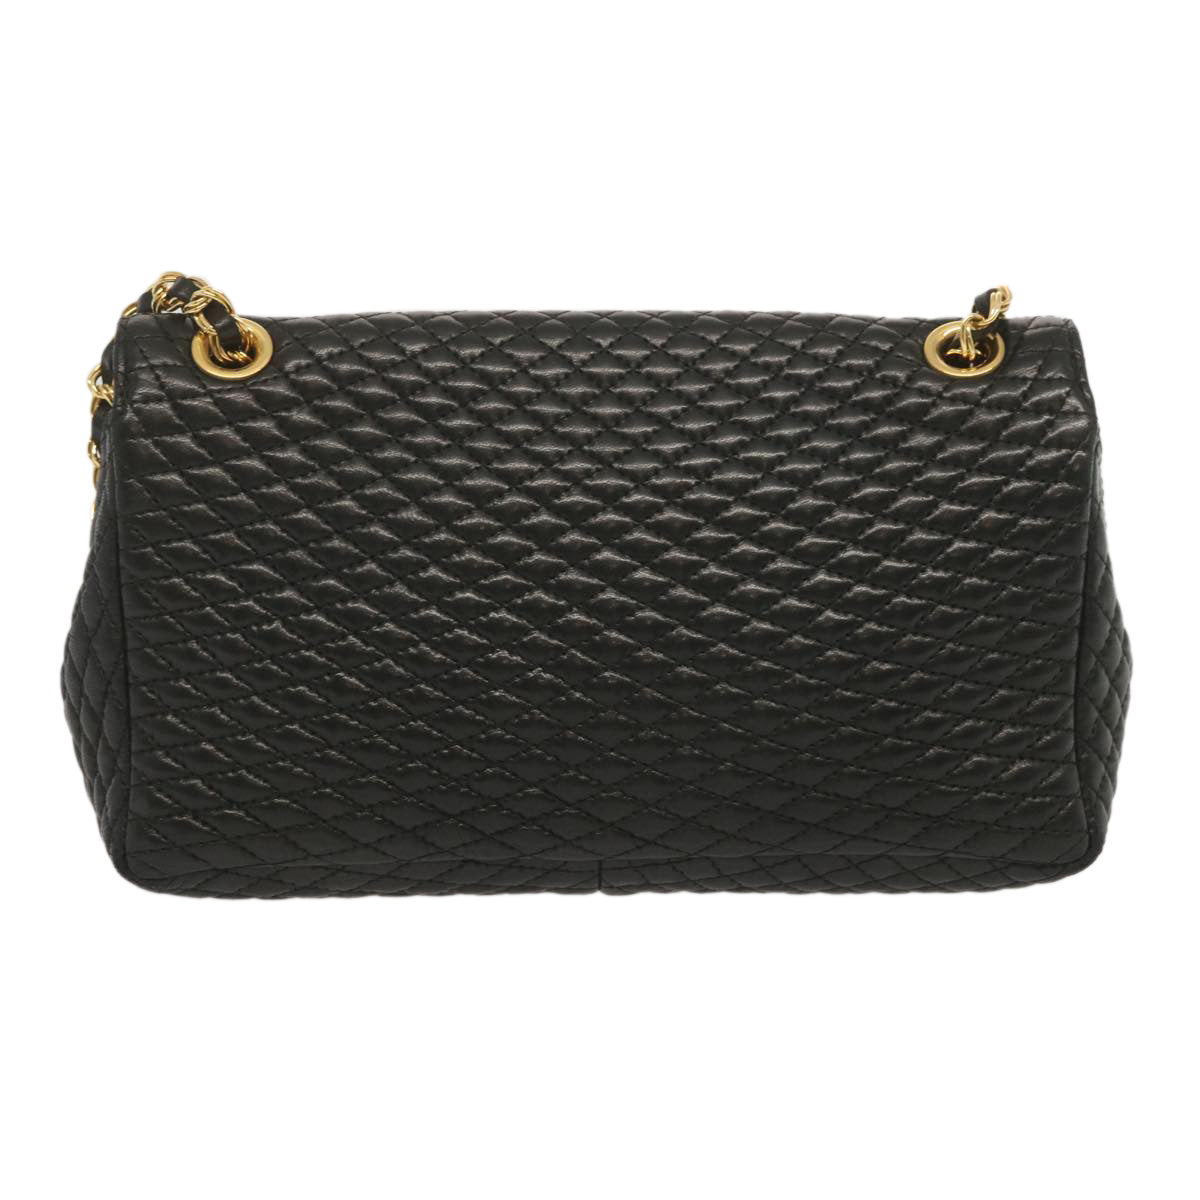 BALLY Quilted Chain Shoulder Bag Leather Black Auth yb531 - 0